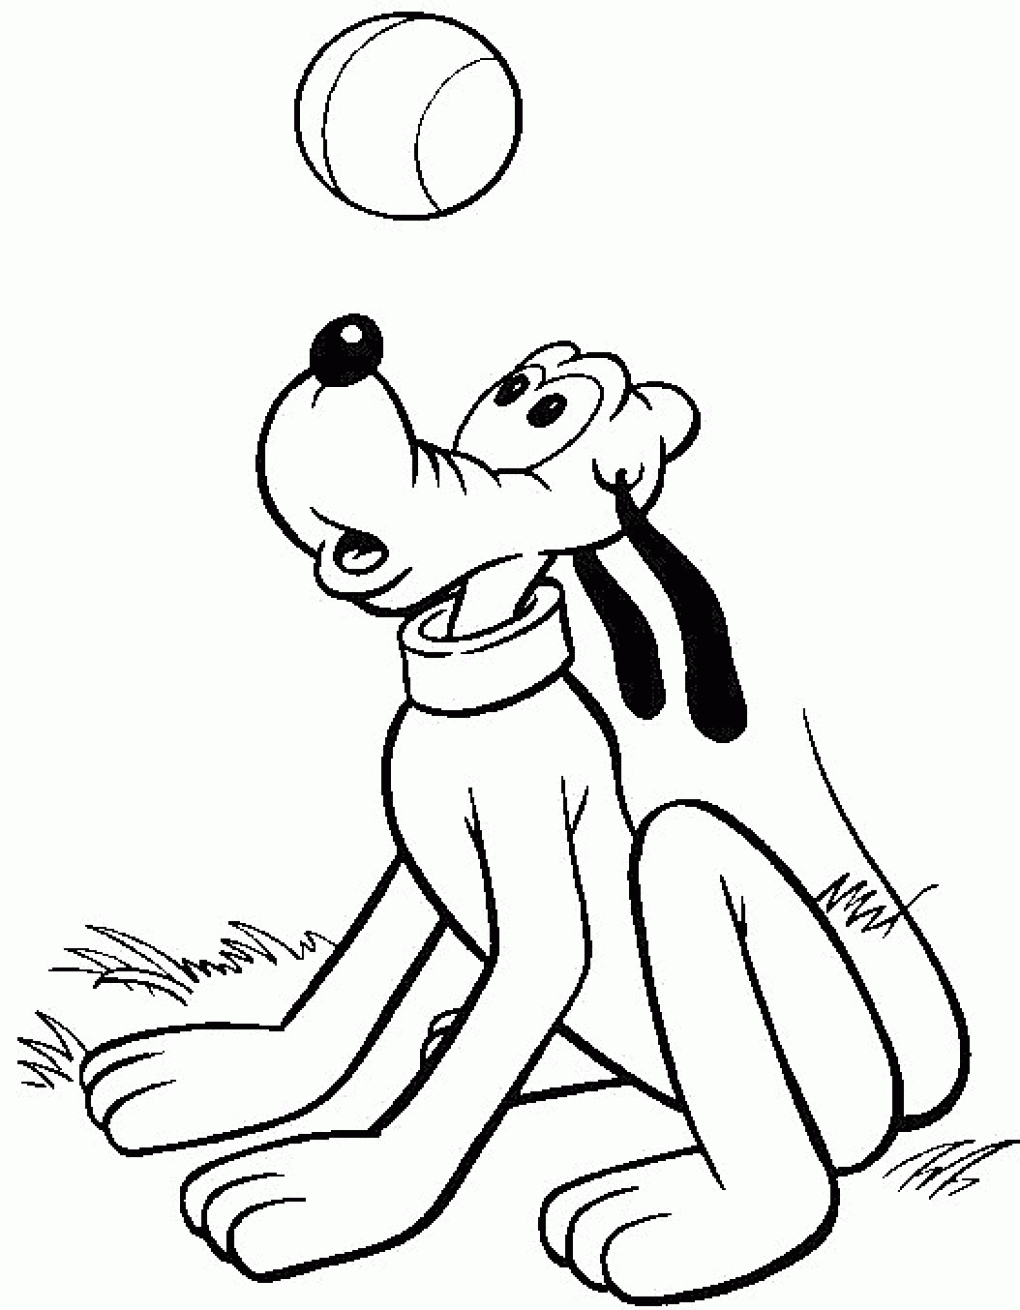 pluto coloring pages the best free pluto drawing images download from 281 free pages pluto coloring 